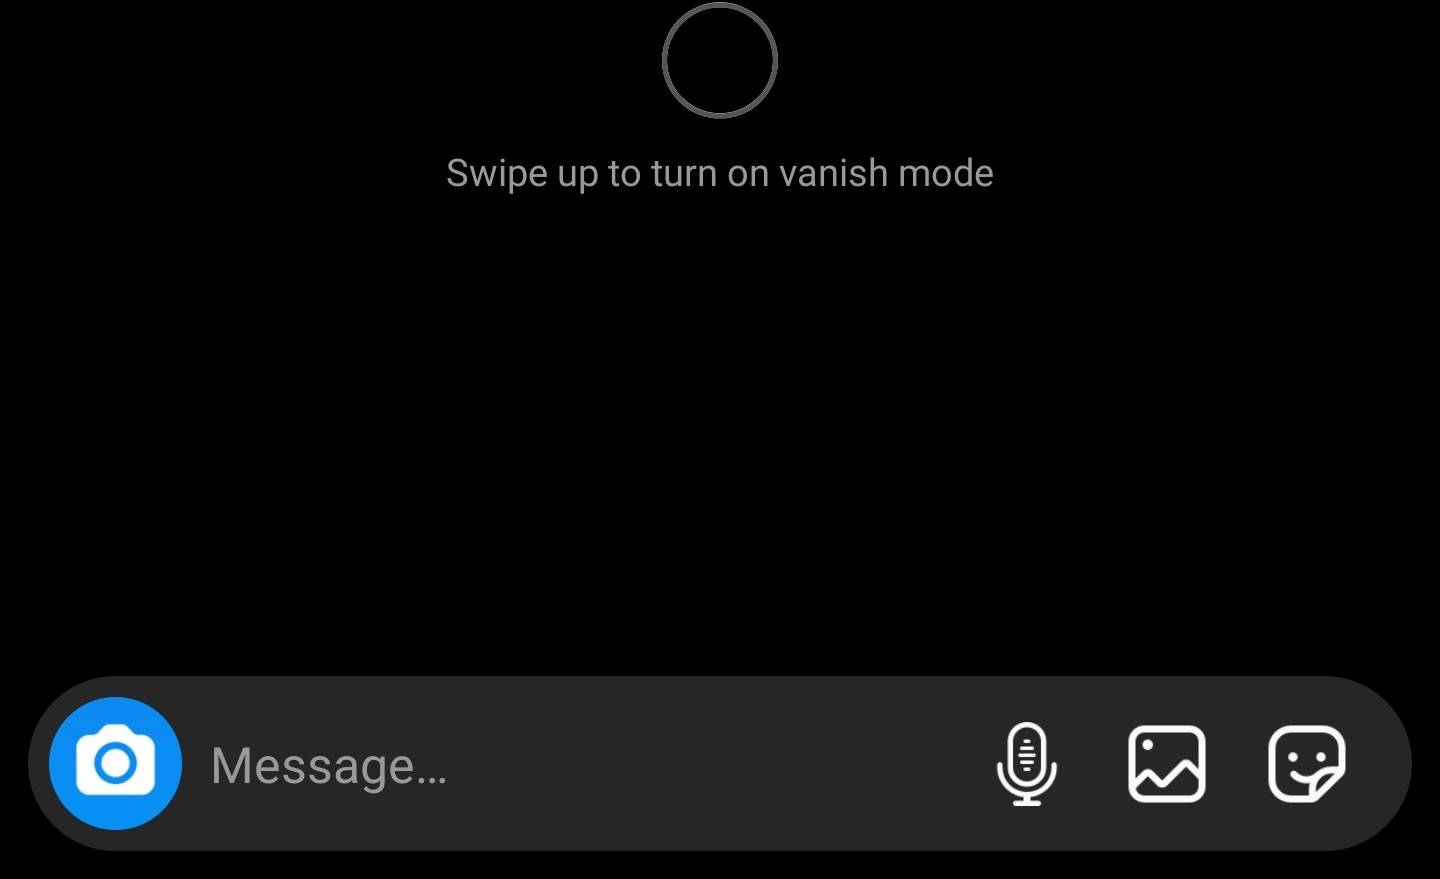 Vanish Mode On Instagram How to use the new Vanish mode feature on